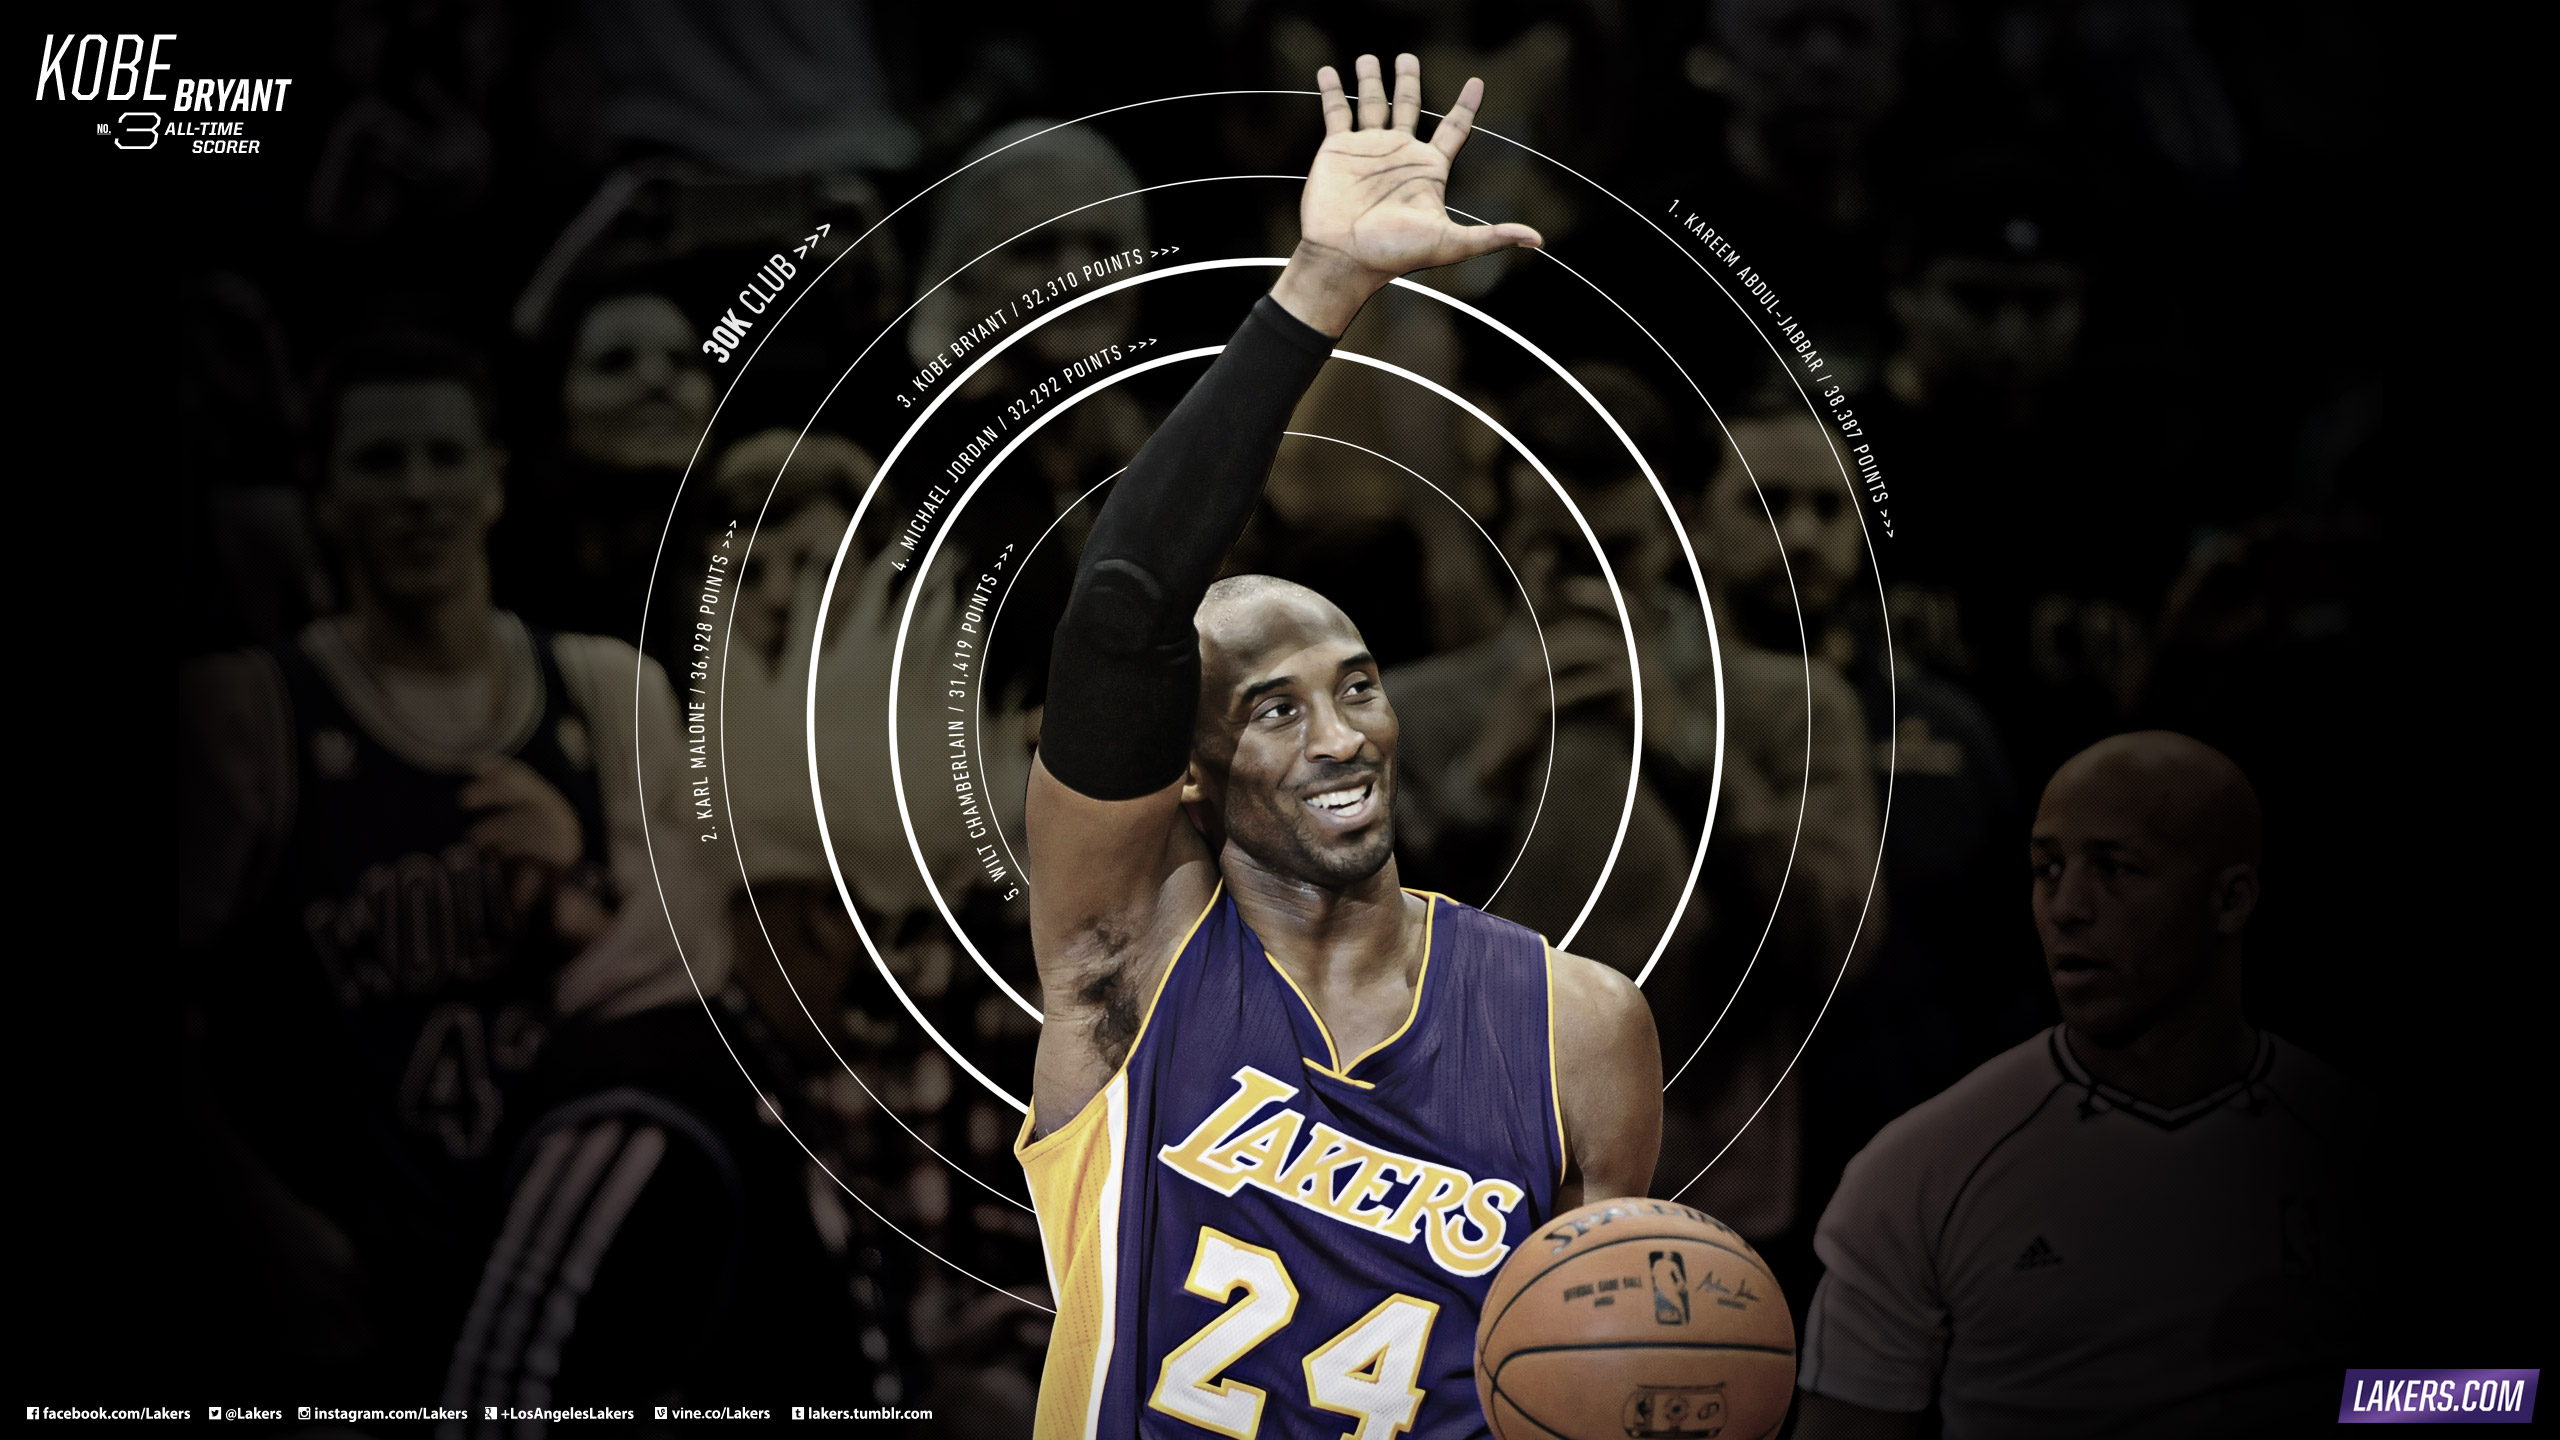 Kobe Bryant Wallpaper High Resolution And Quality